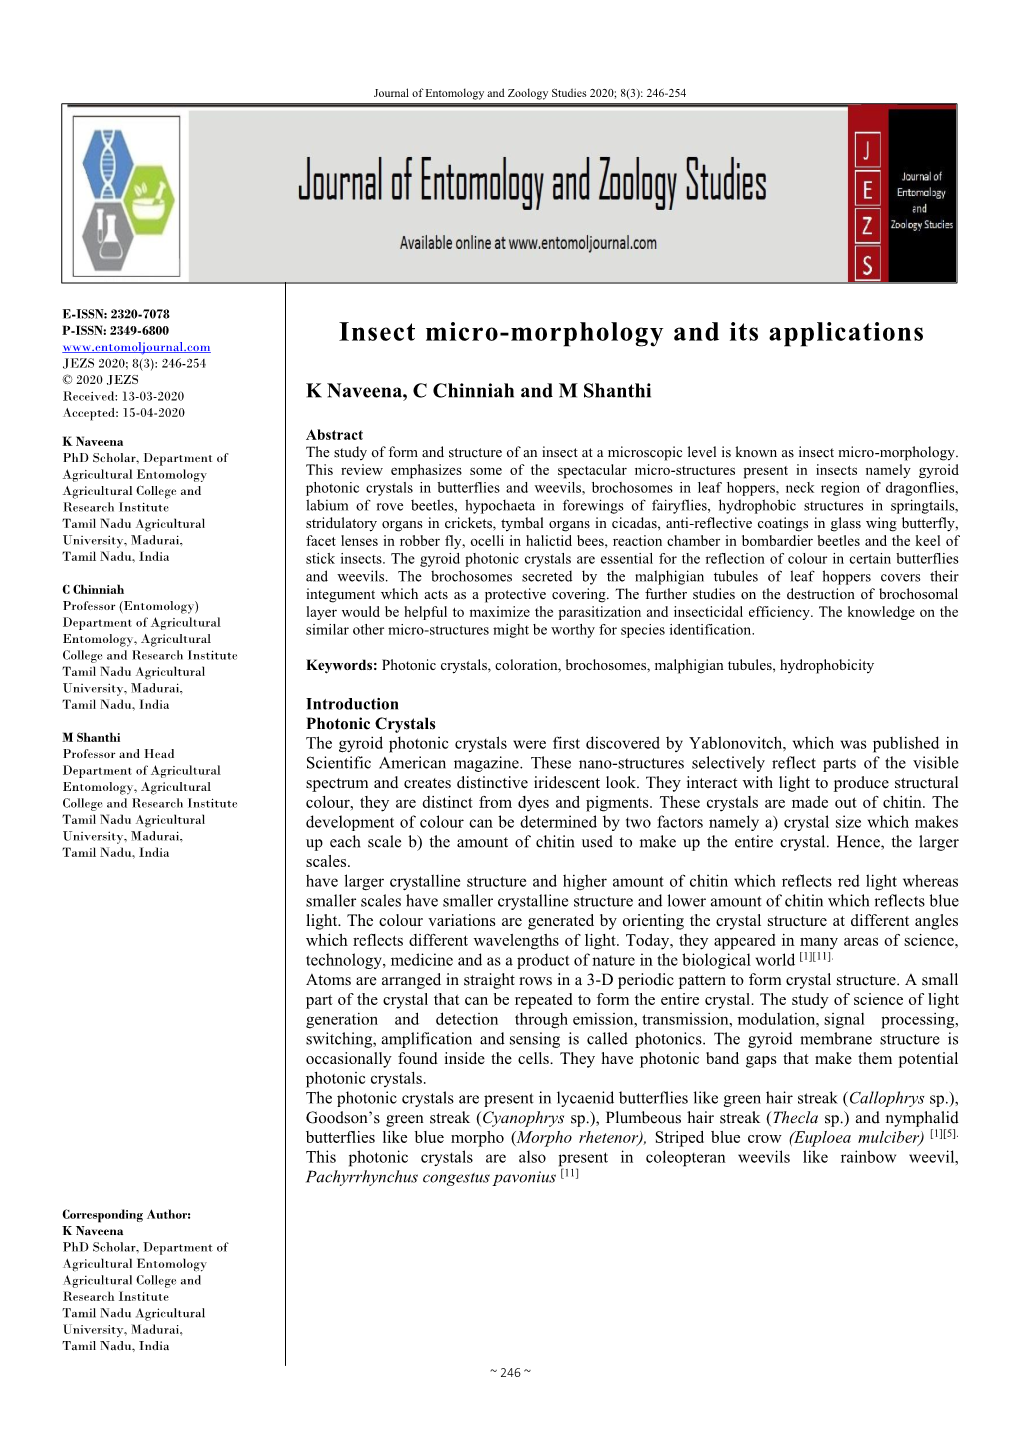 Insect Micro-Morphology and Its Applications